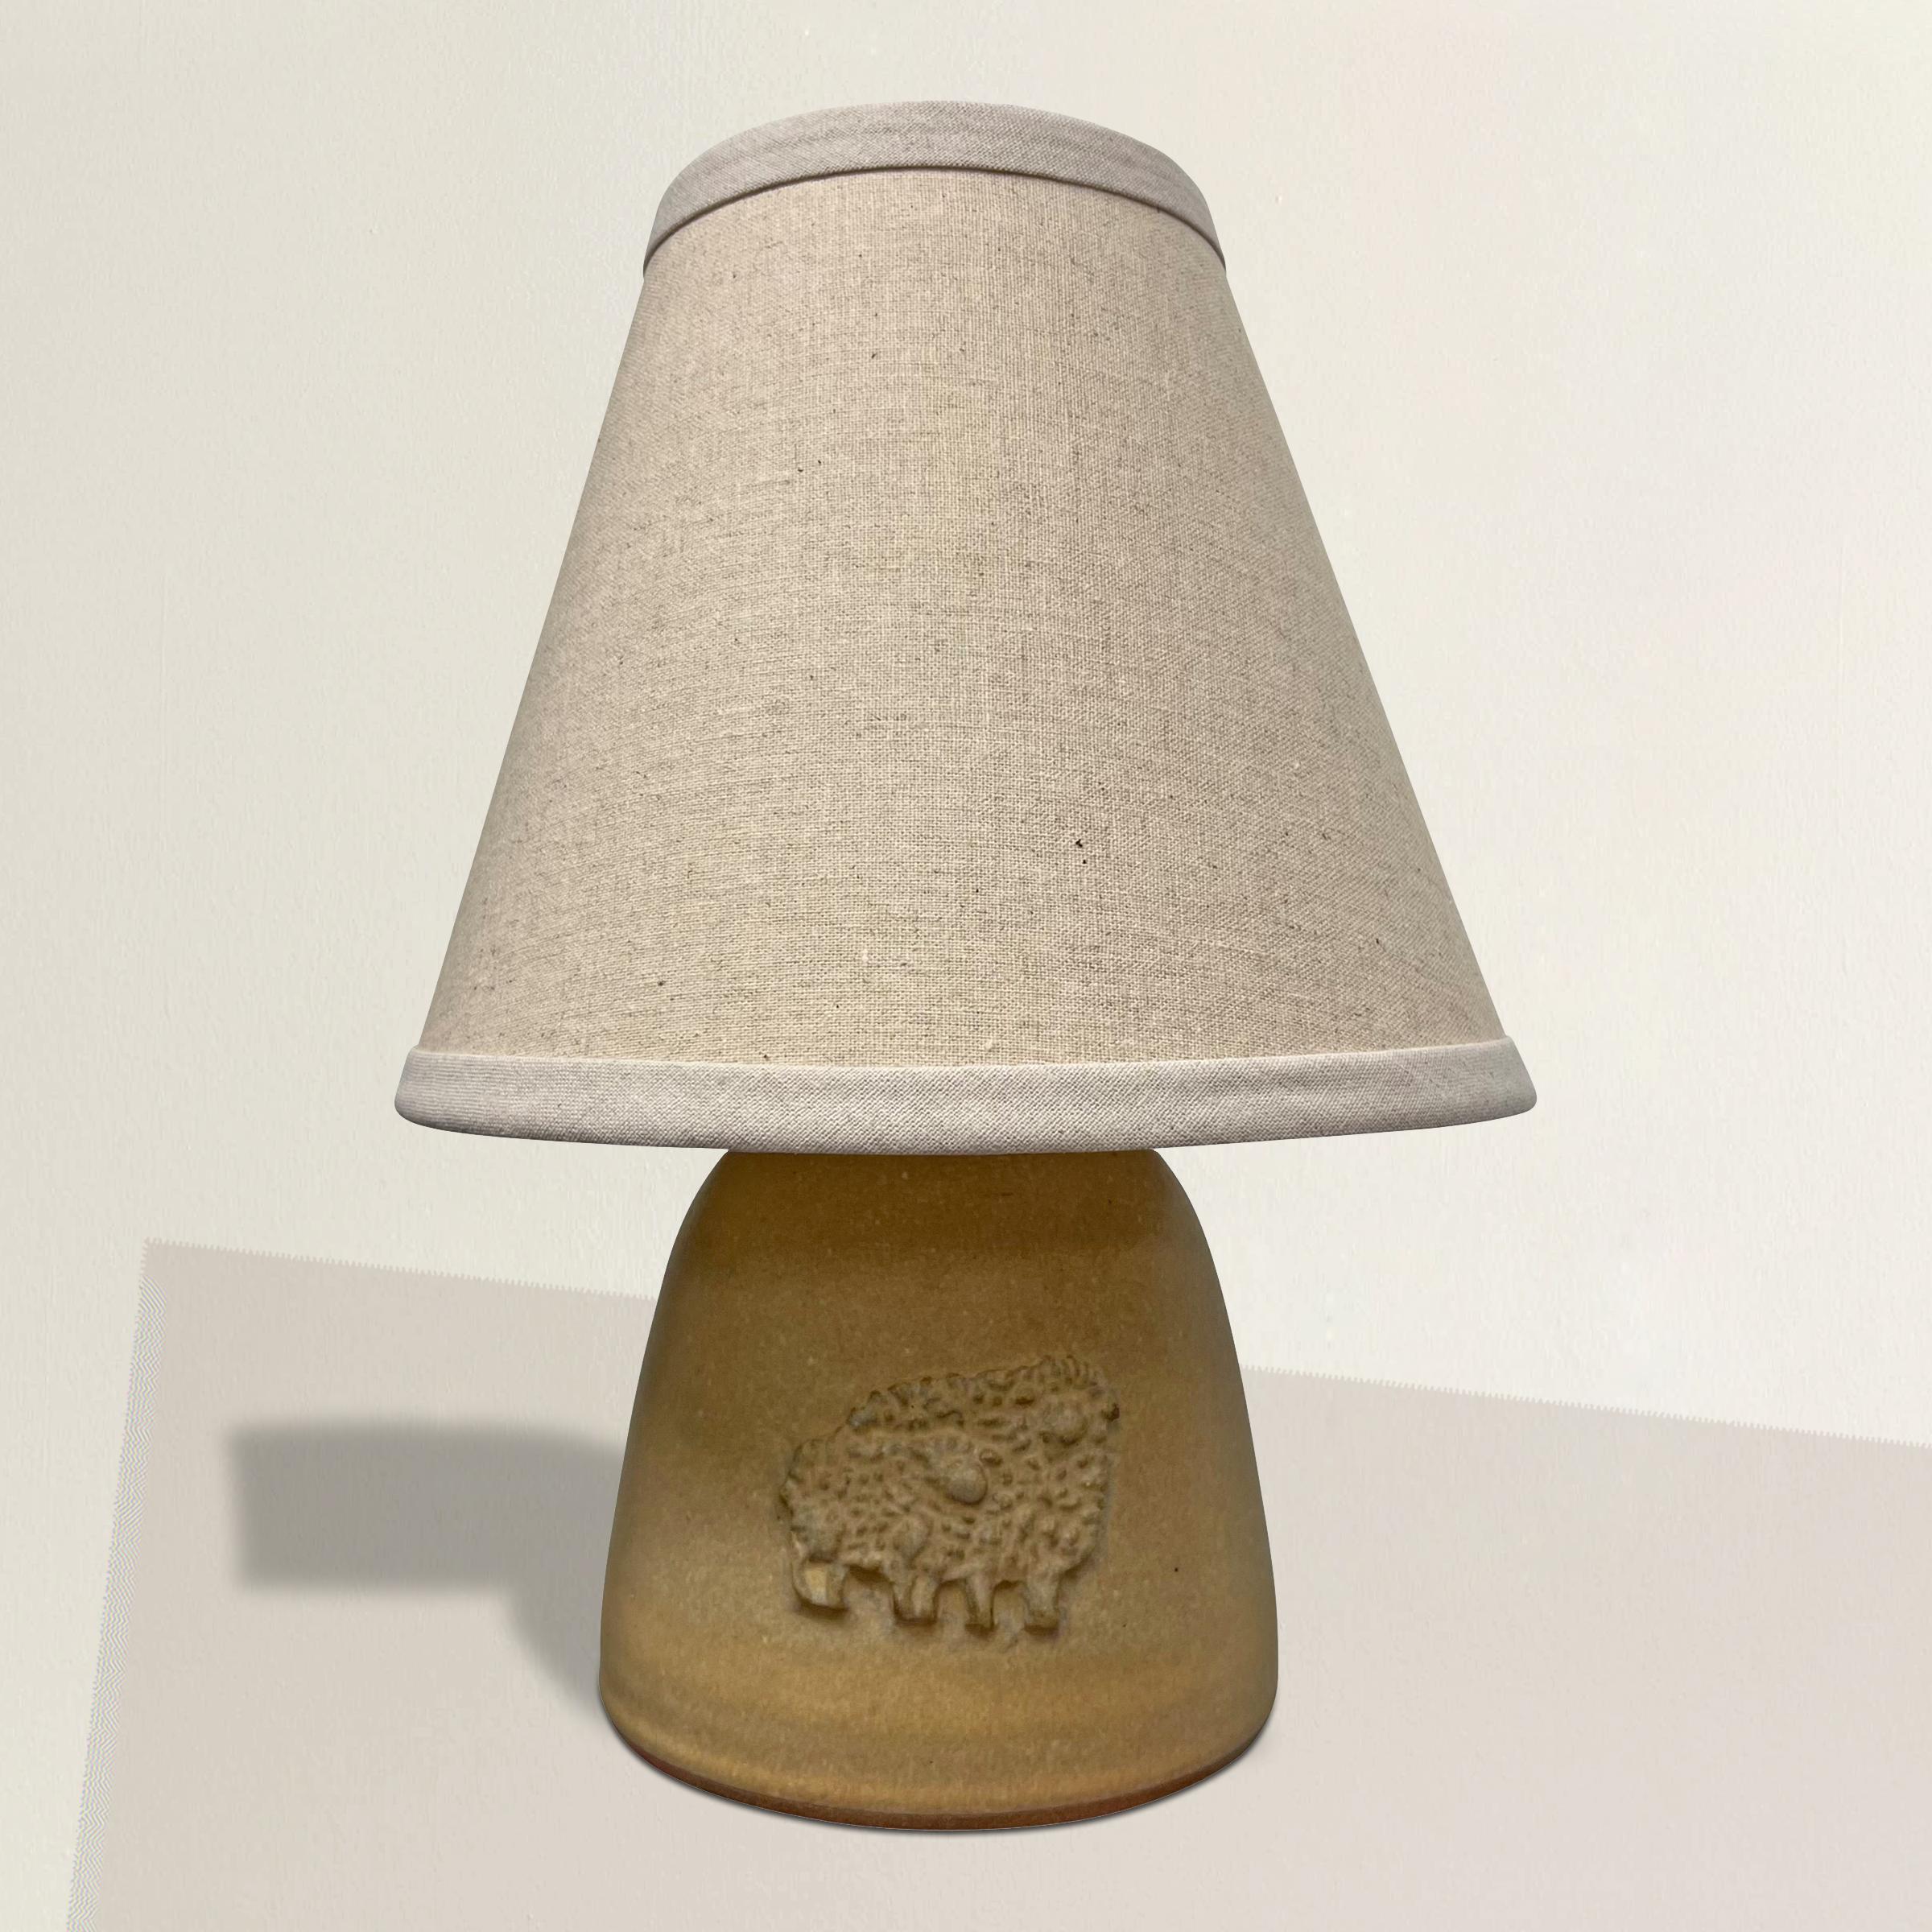 A charming and whimsical petite late 20th century American studio pottery lamp with a pair of sheep applied to the front, and covered in the most perfect brown-mustard glaze, and finished with a new linen shade.  Perfectly at home in your bedroom,